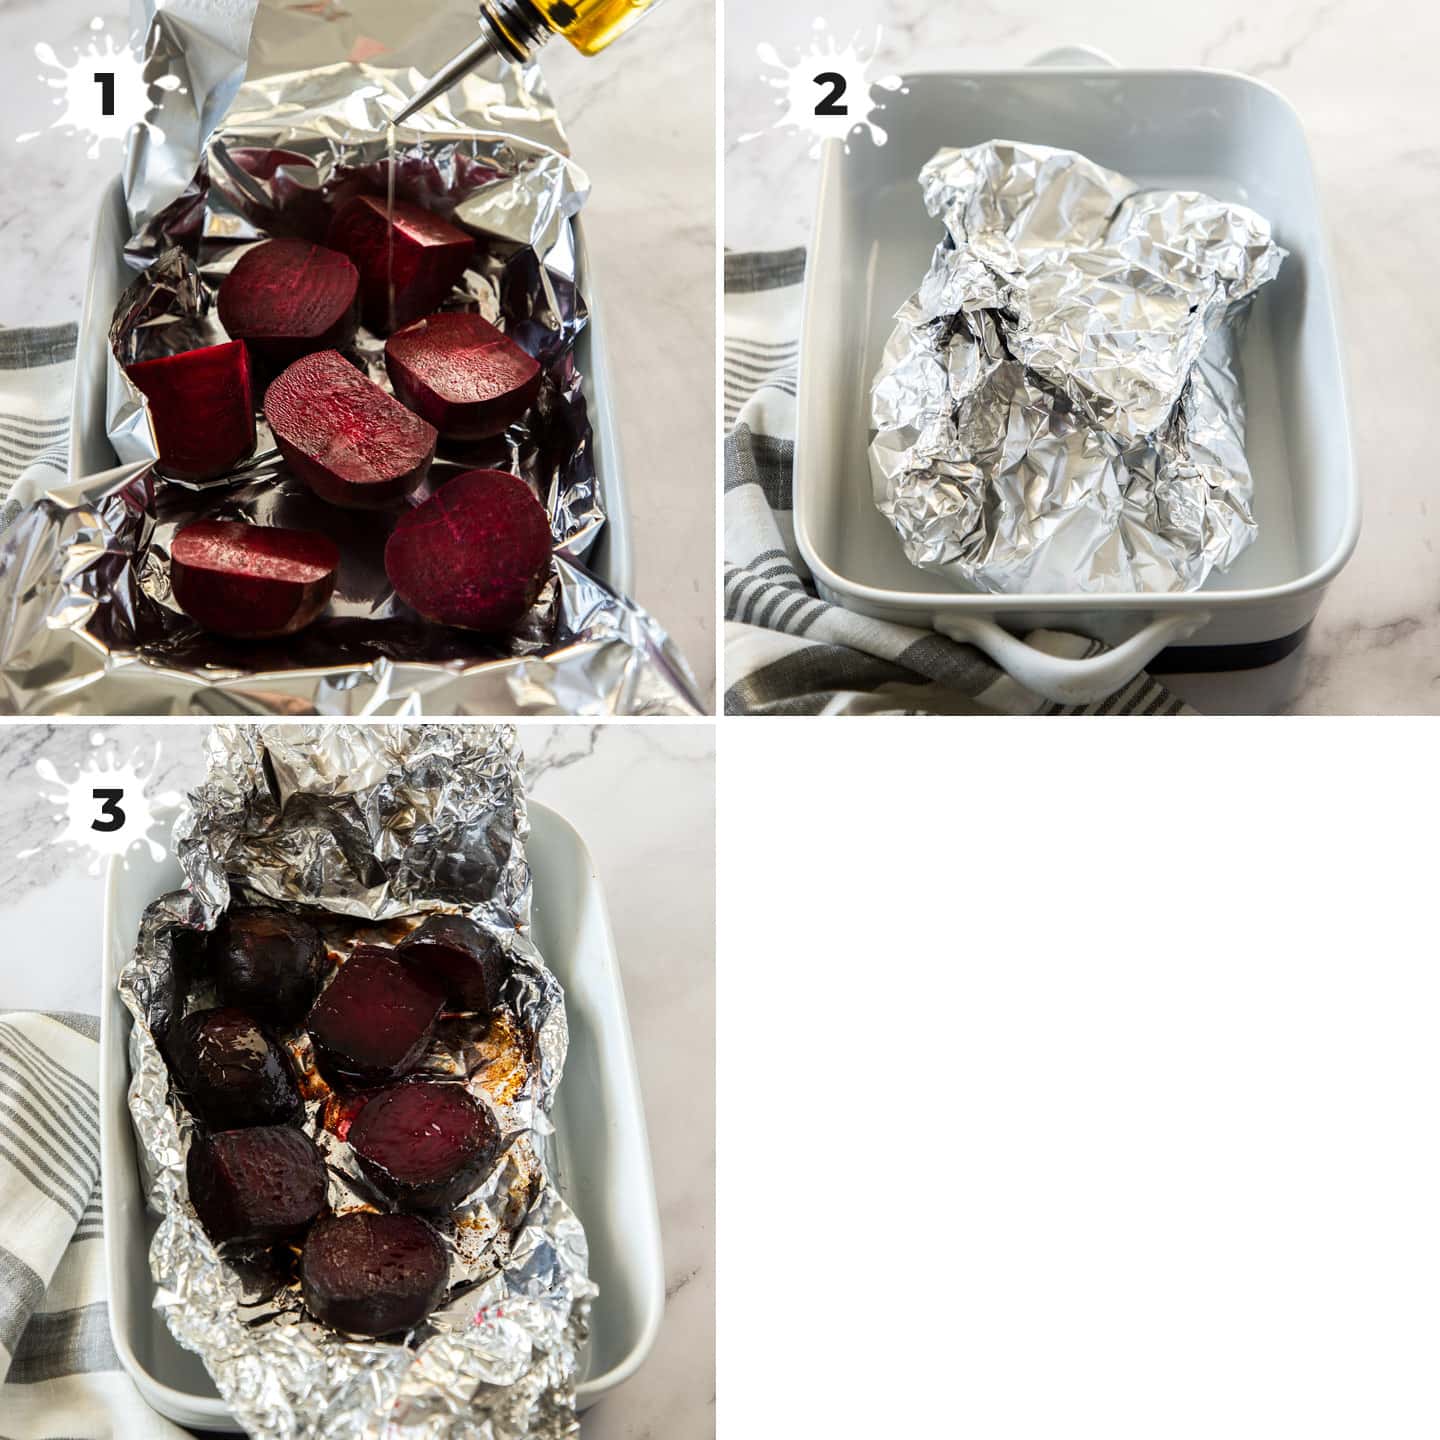 Beetroots in foil in a white casserole dish